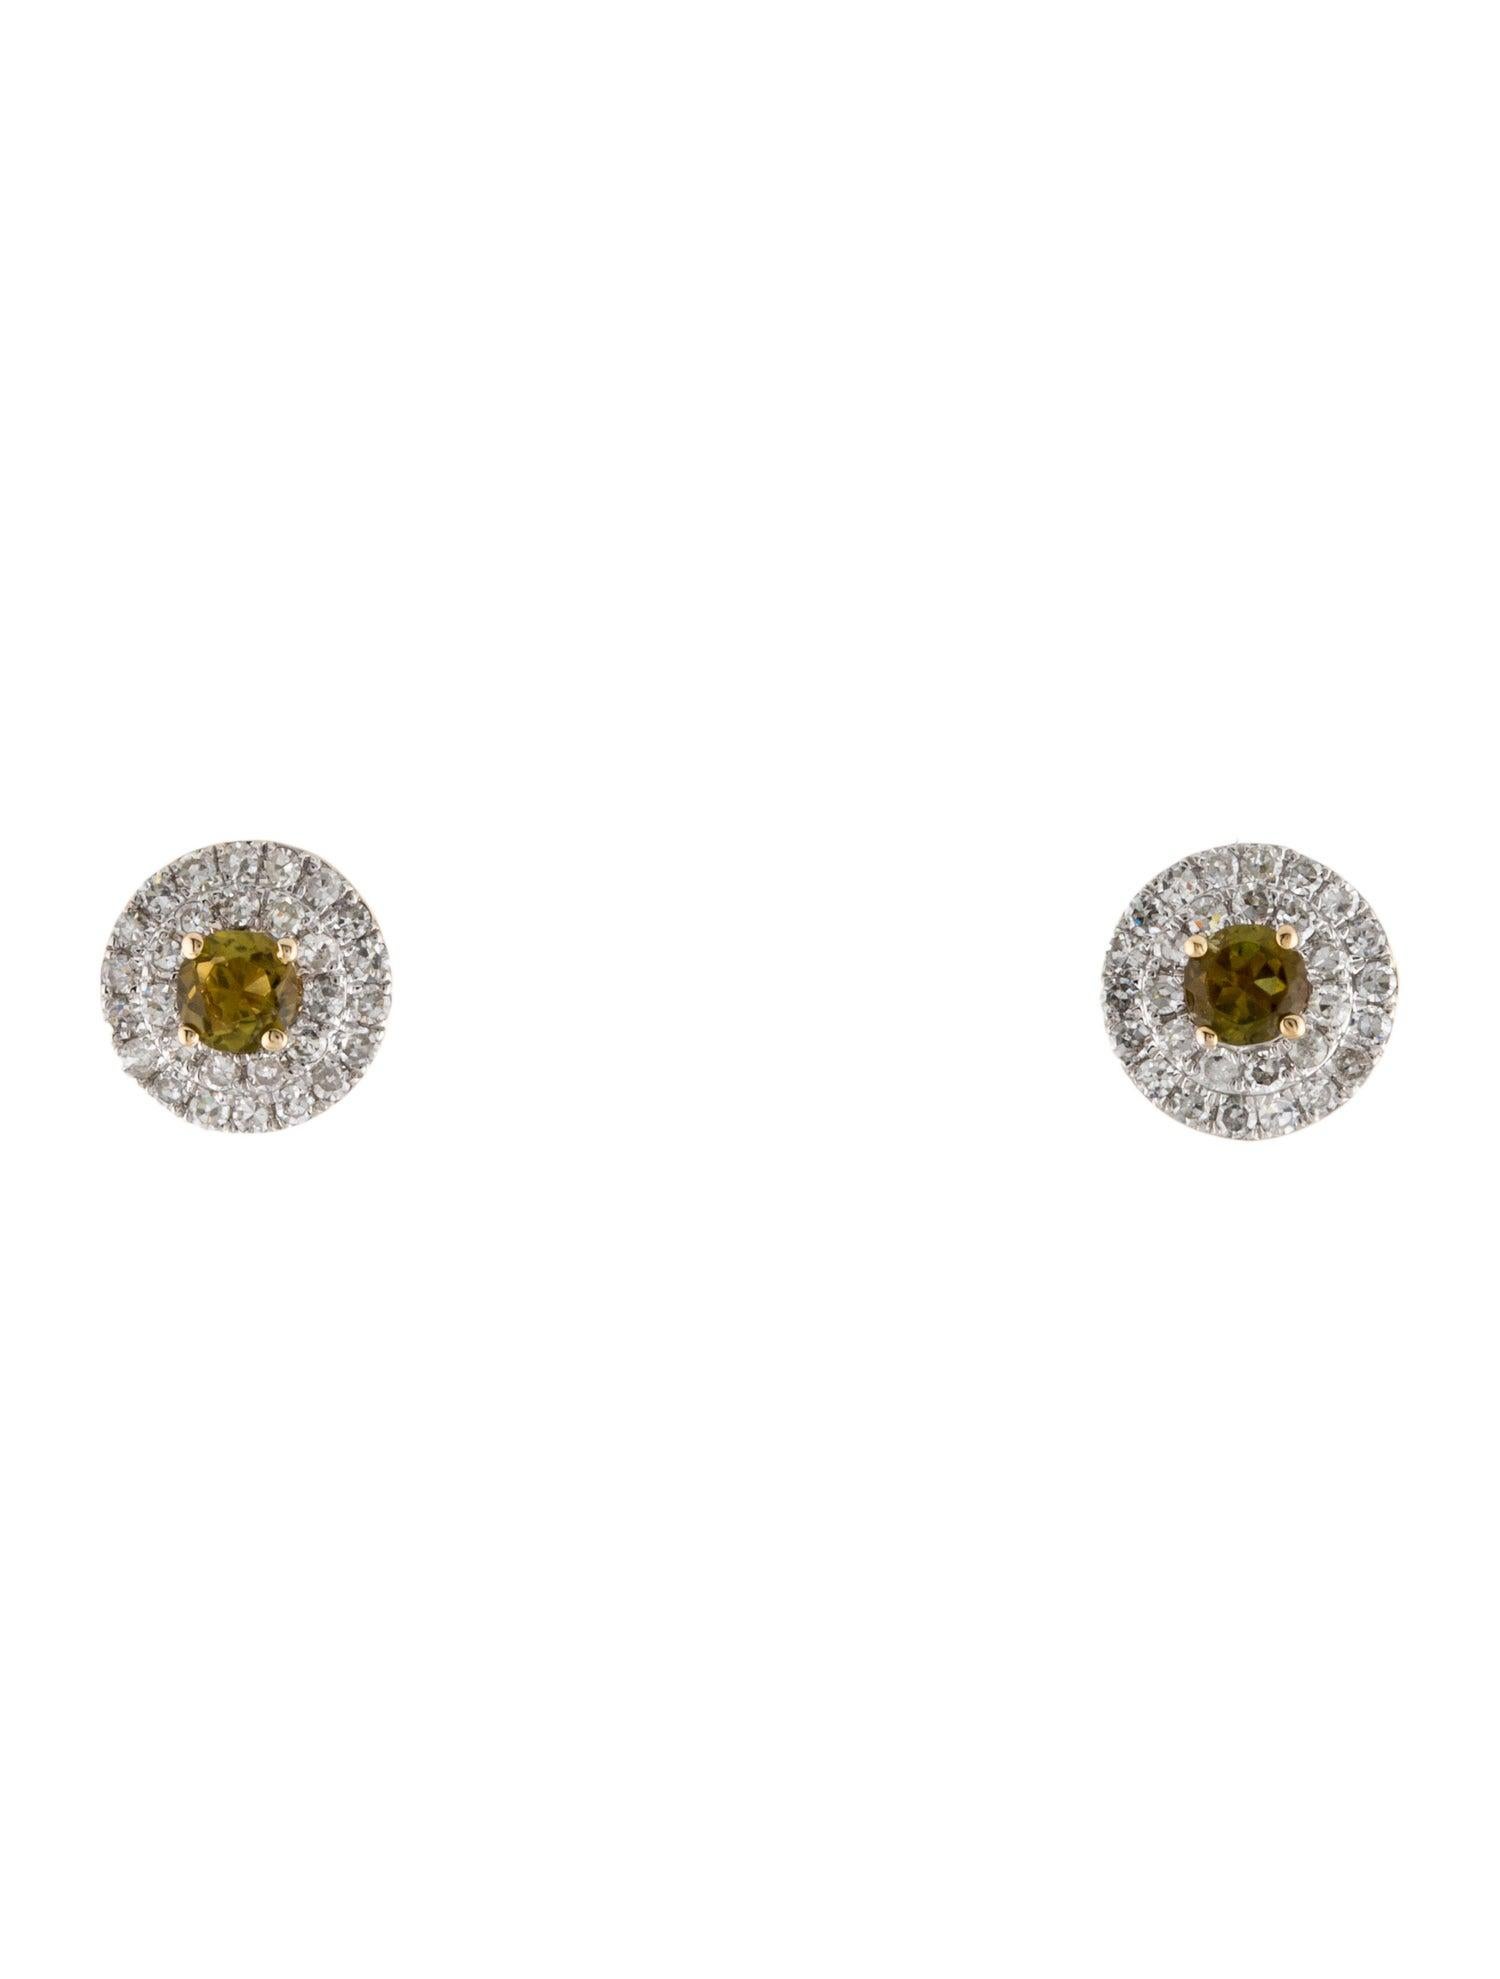 14K Tourmaline & Diamond Stud Earrings - Luxurious & Elegant Gemstone Jewelry In New Condition For Sale In Holtsville, NY